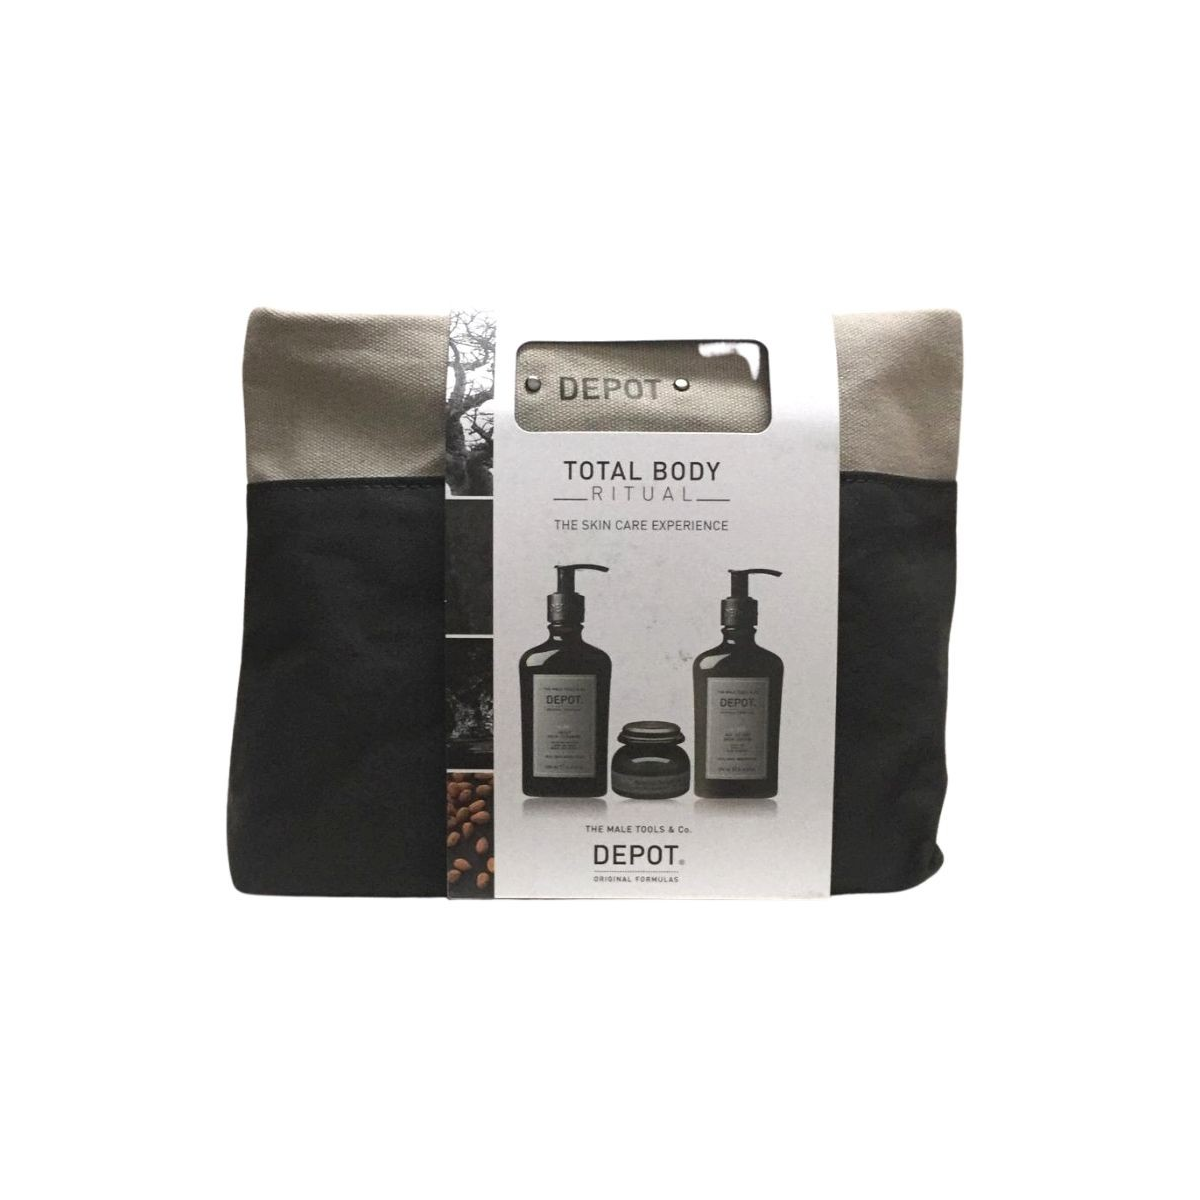 DEPOT - TOTAL BODY RITUAL KIT - THE SKIN CARE EXPERIENCE